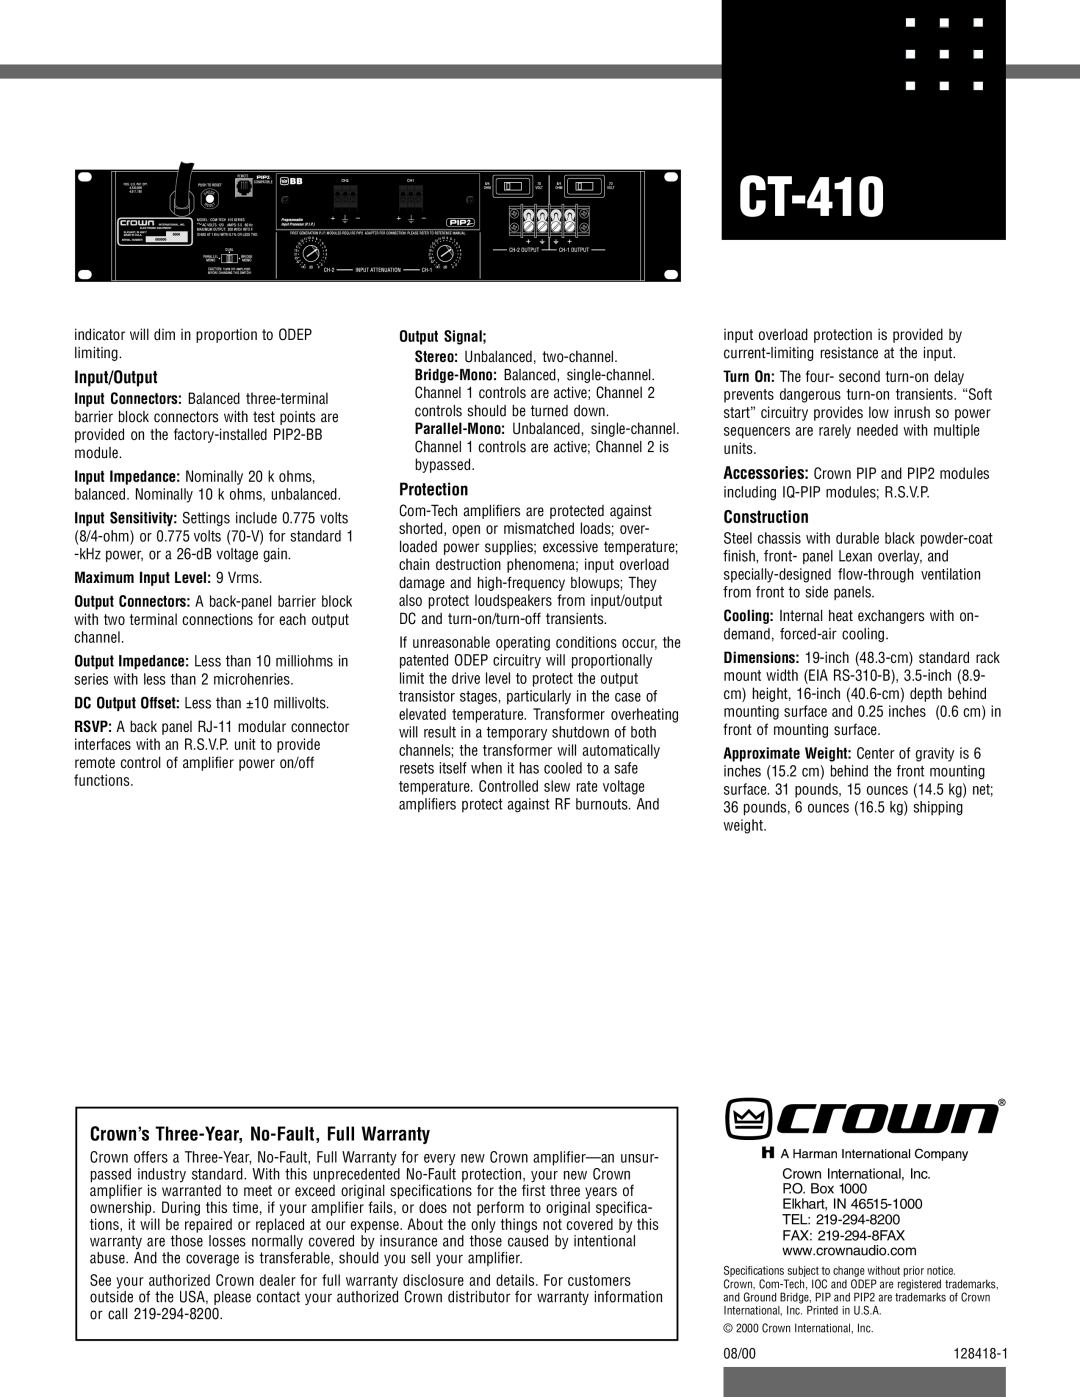 Crown Audio CT-410 specifications Crown’s Three-Year, No-Fault,Full Warranty, Input/Output, Protection, Construction 